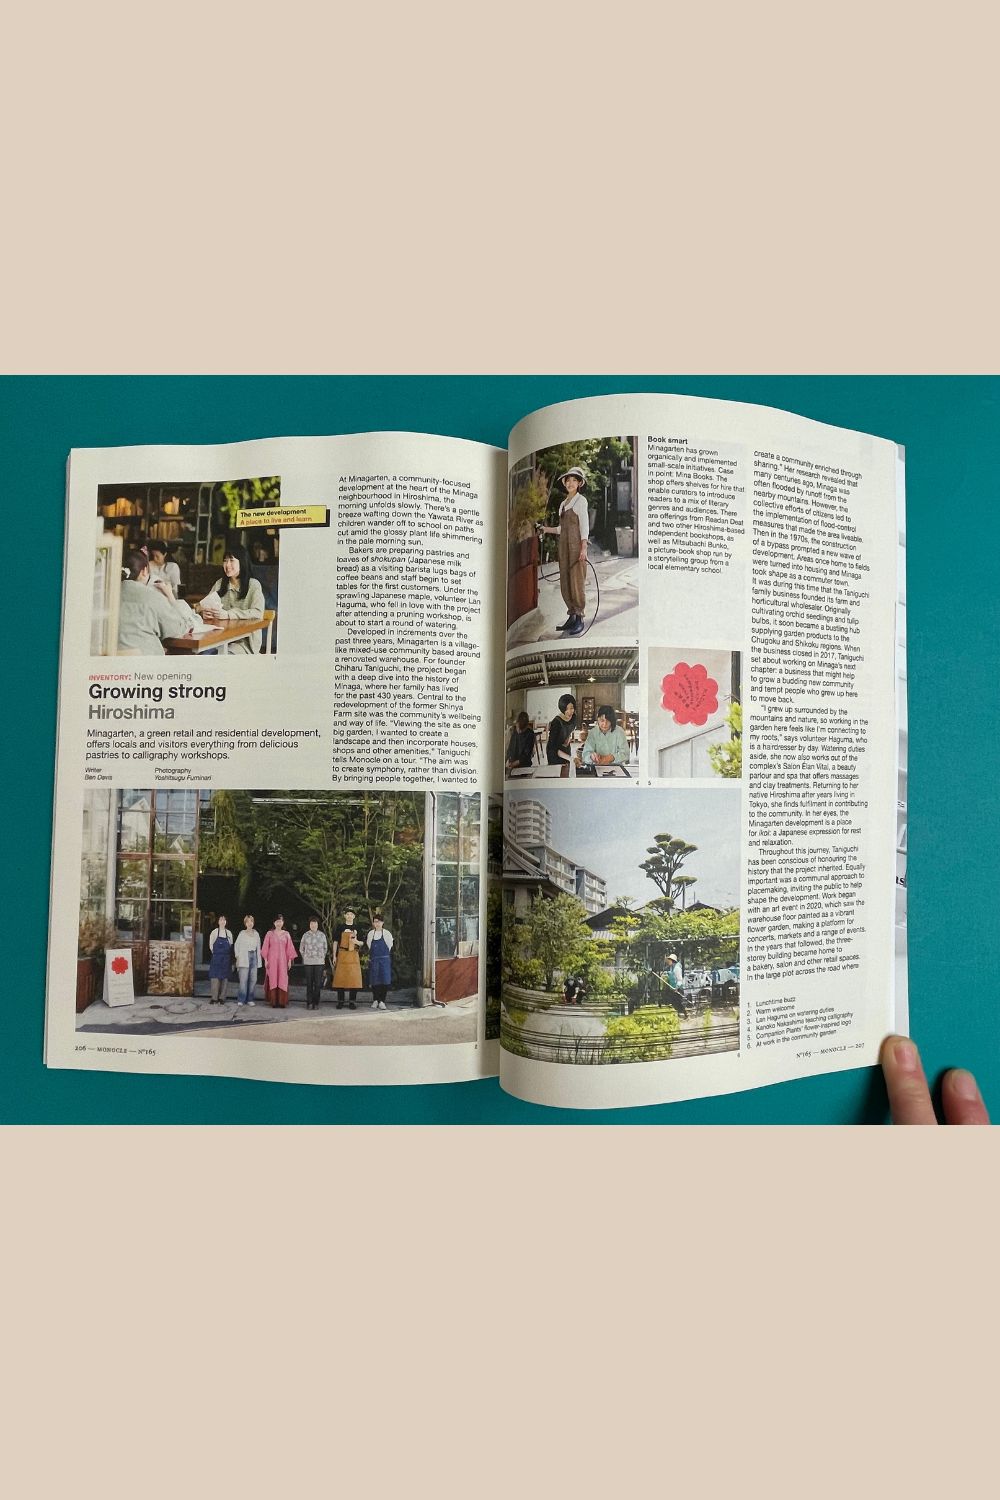 Monocle Issue 165 July/August 2023